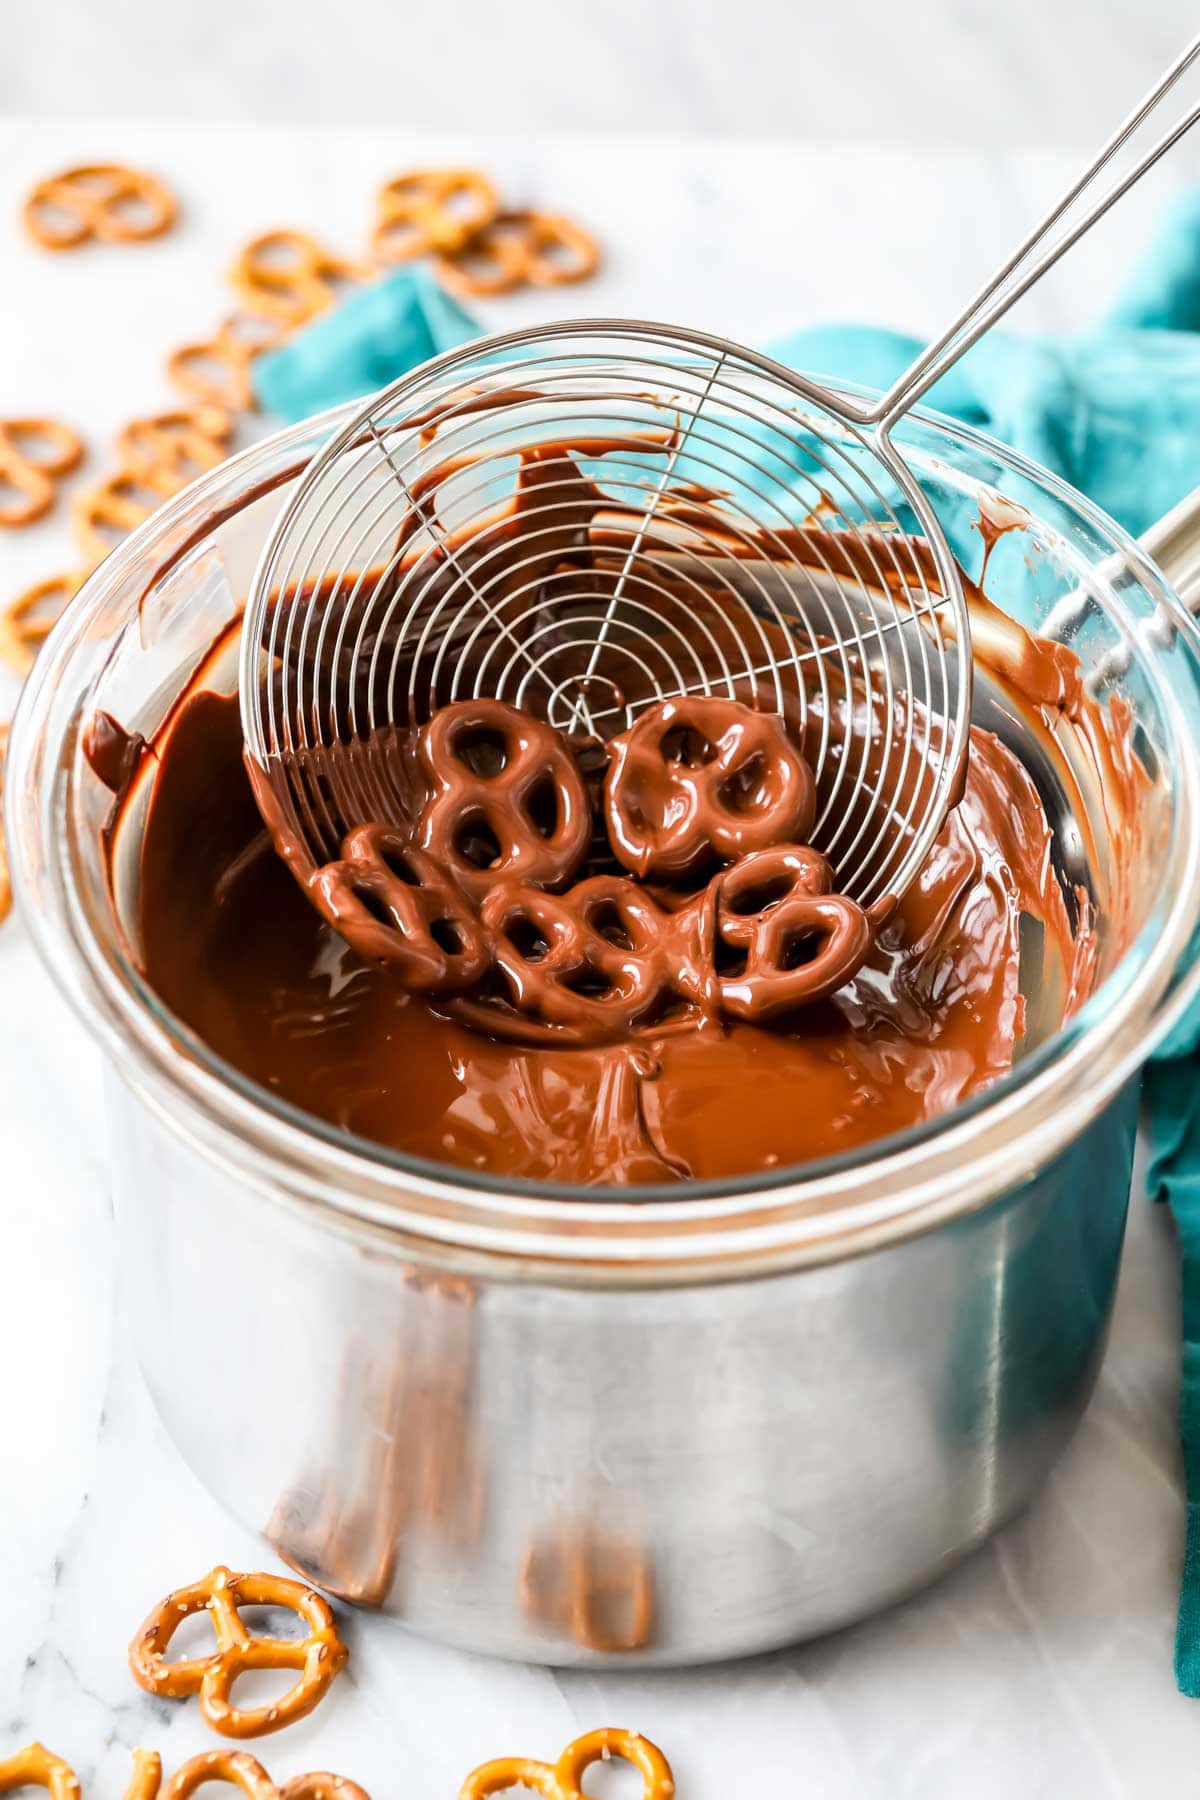 Spider dipping pretzels into chocolate melting over a double boiler.